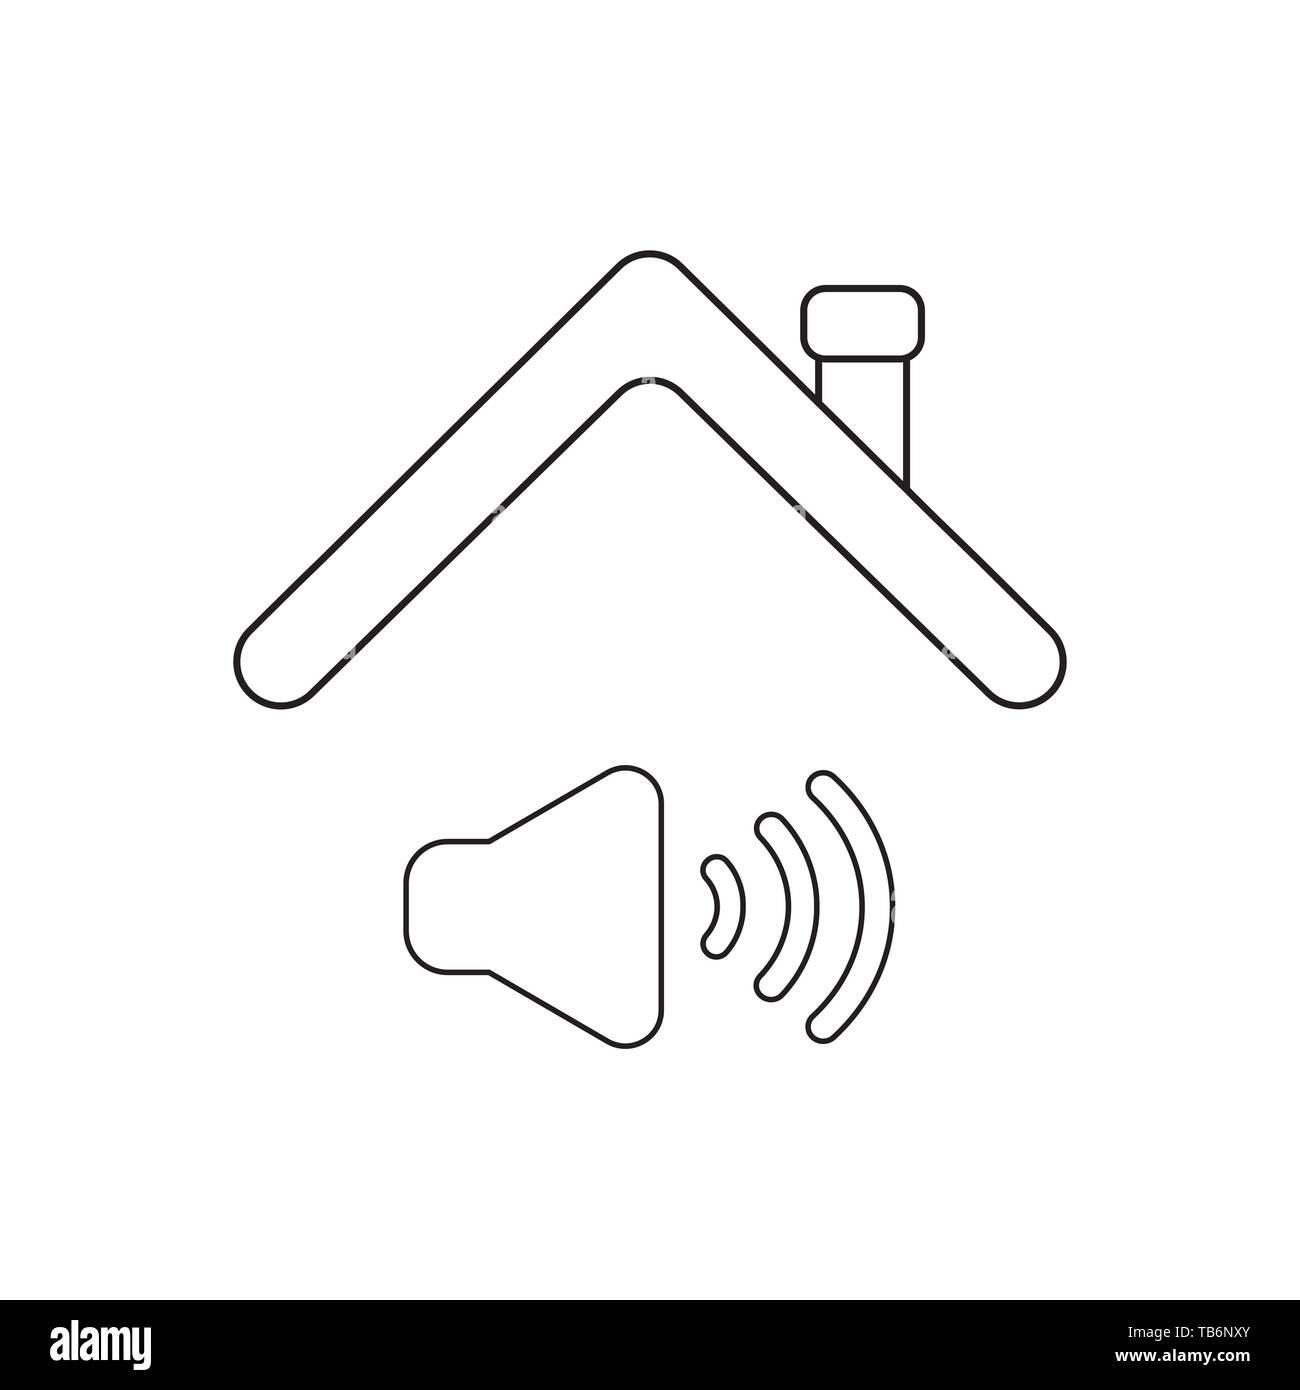 Vector icon concept of sound on symbol under roof. Black outlines, white background. Stock Vector